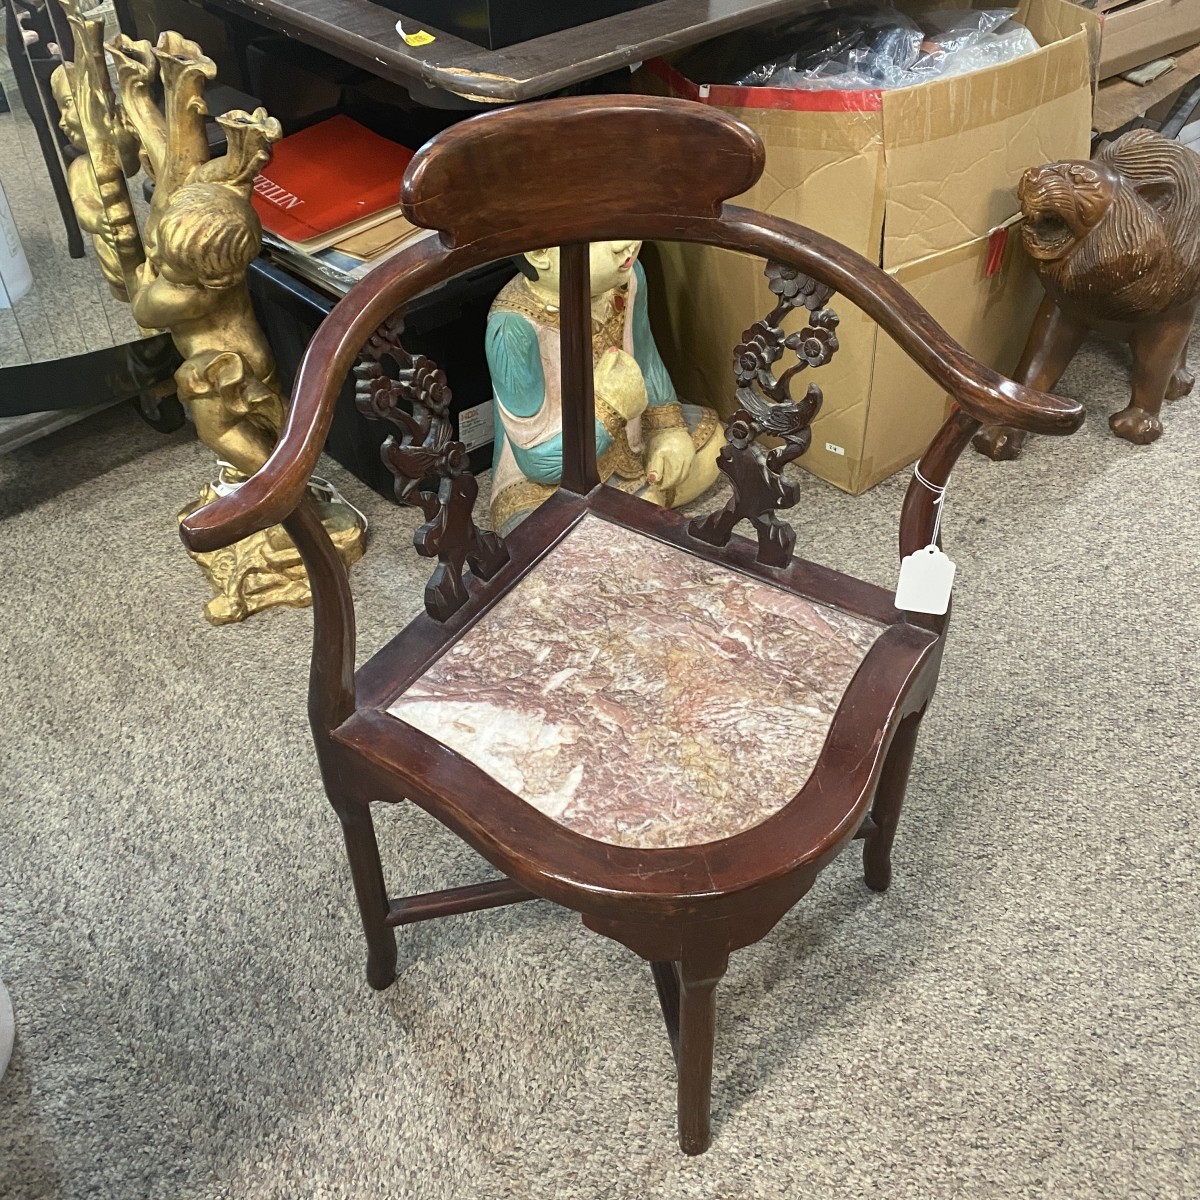 Chinese Chair